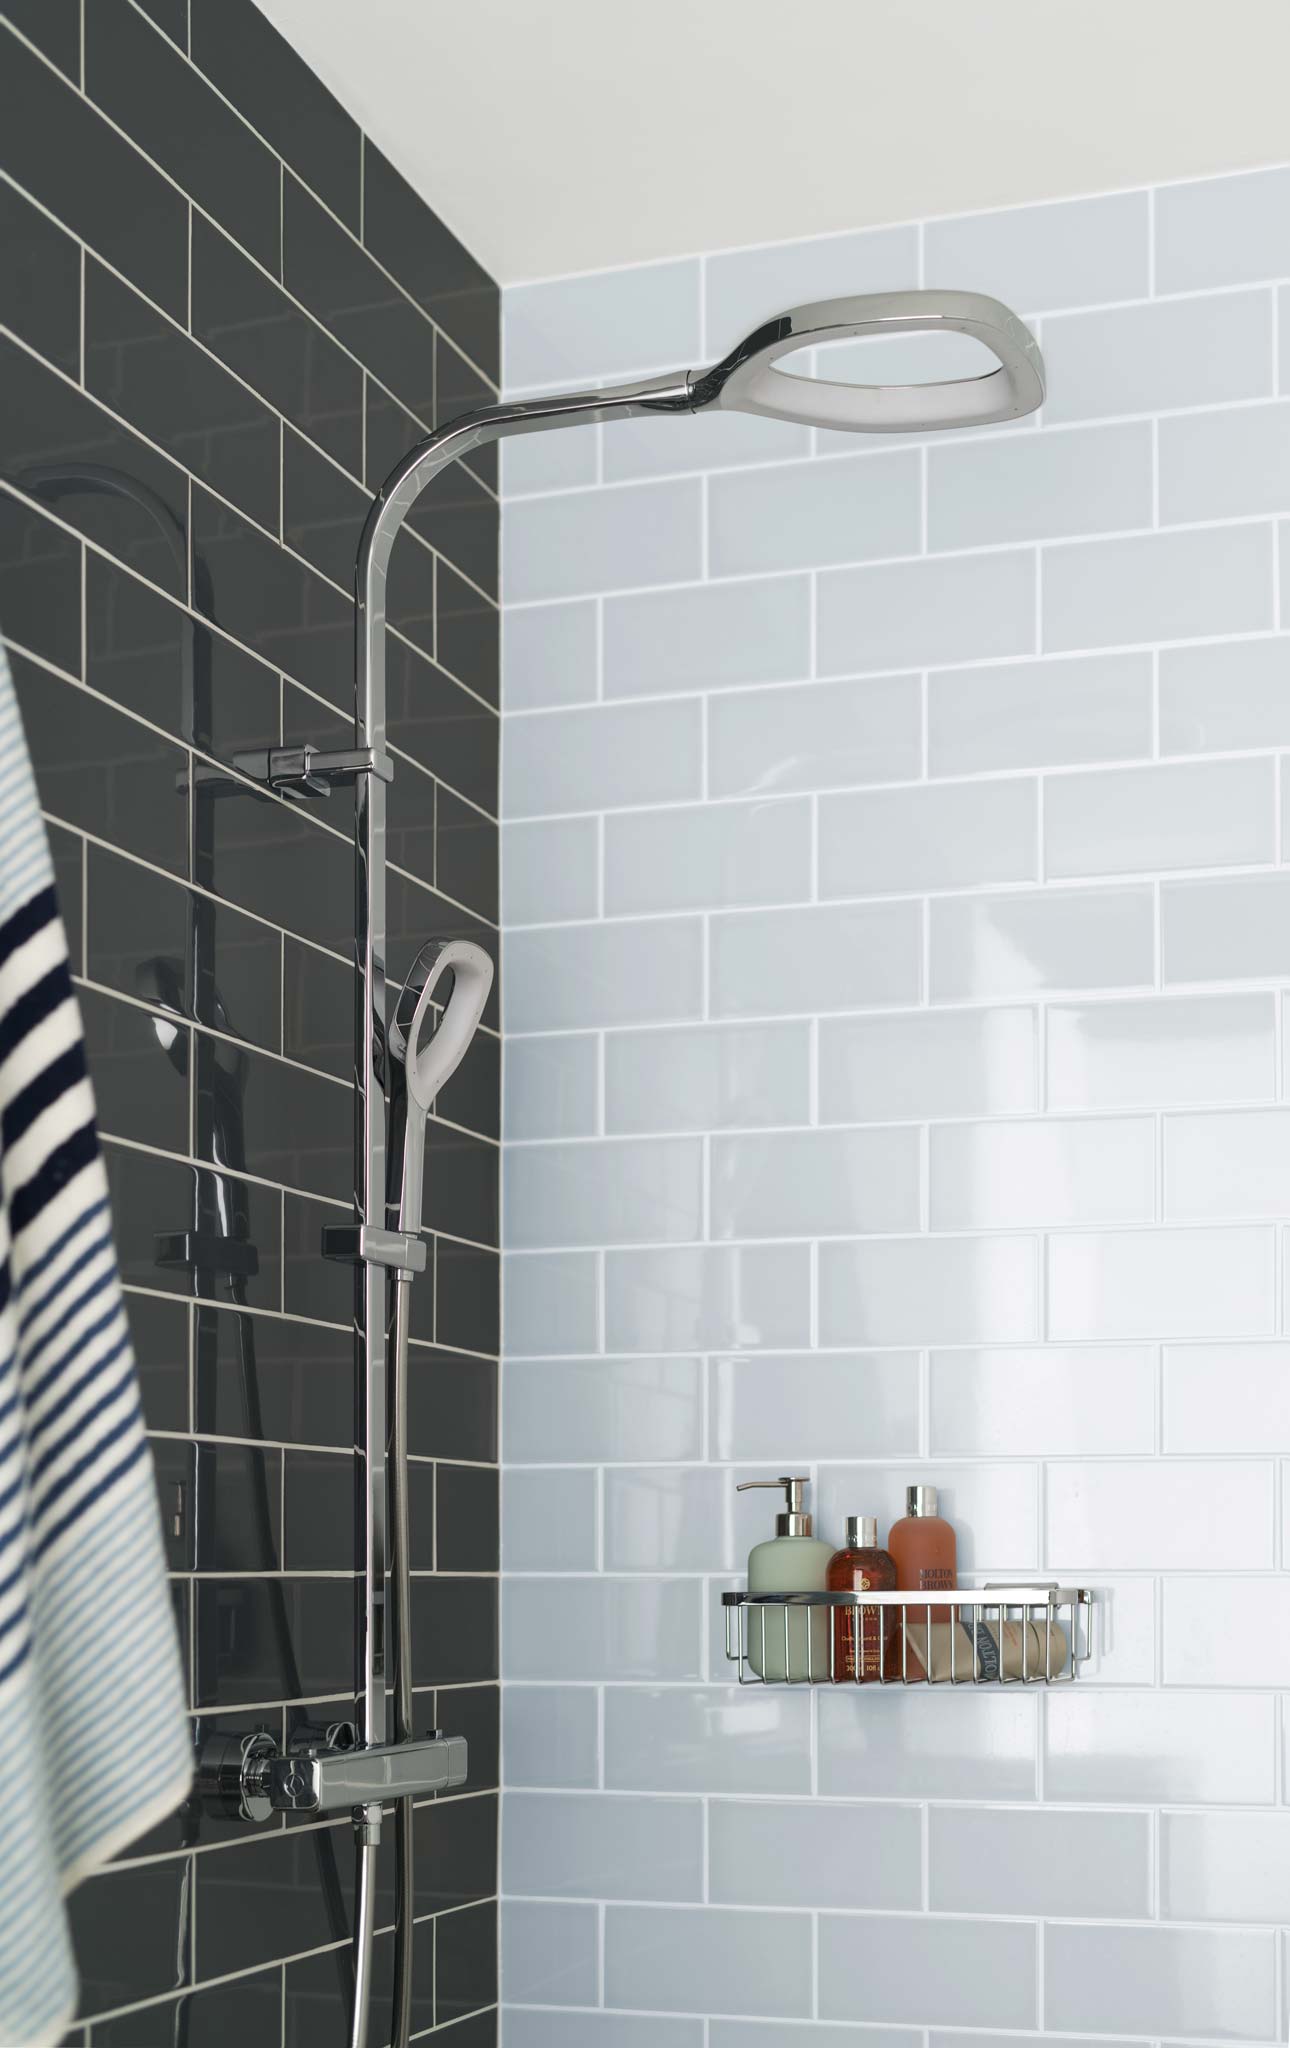 A wall mounted thermostatic shower mixer with a rigid riser on a tiled wall with a basket of shower bottles and a towel